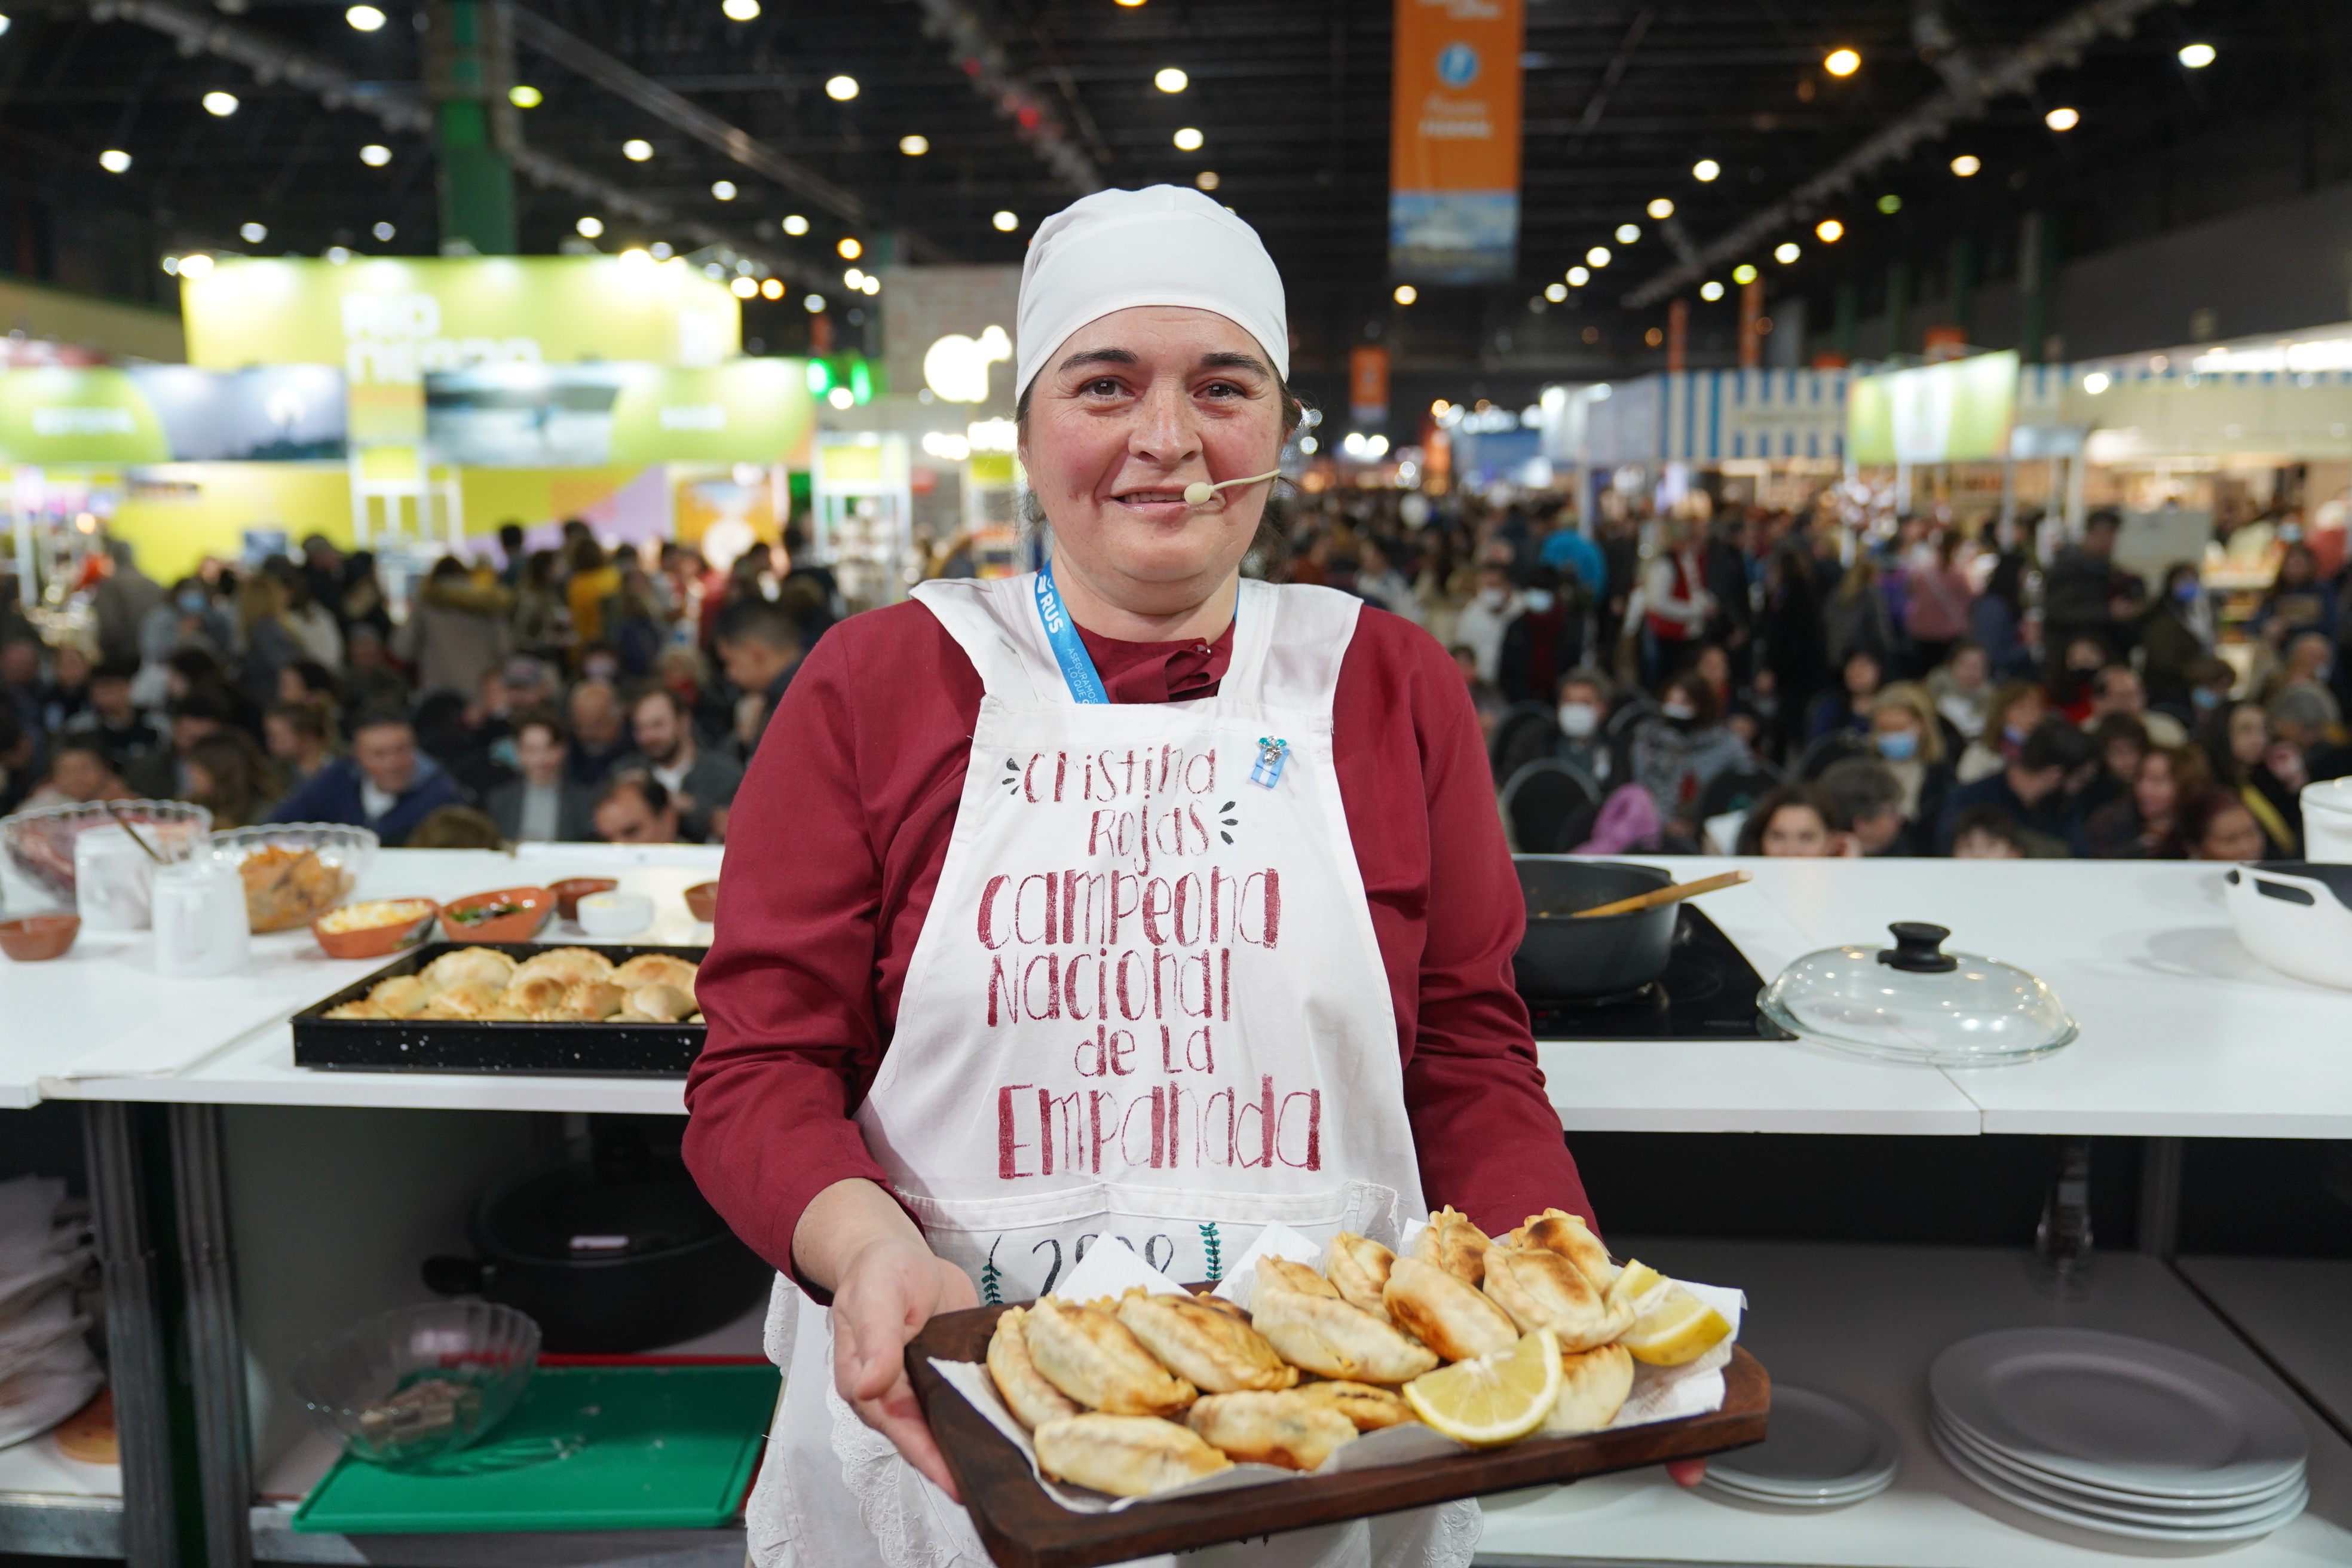 Cristina Rojas Lazarte, champion of the national empanada festival, shares her recipe to replicate on this national date (Wachs Agency)